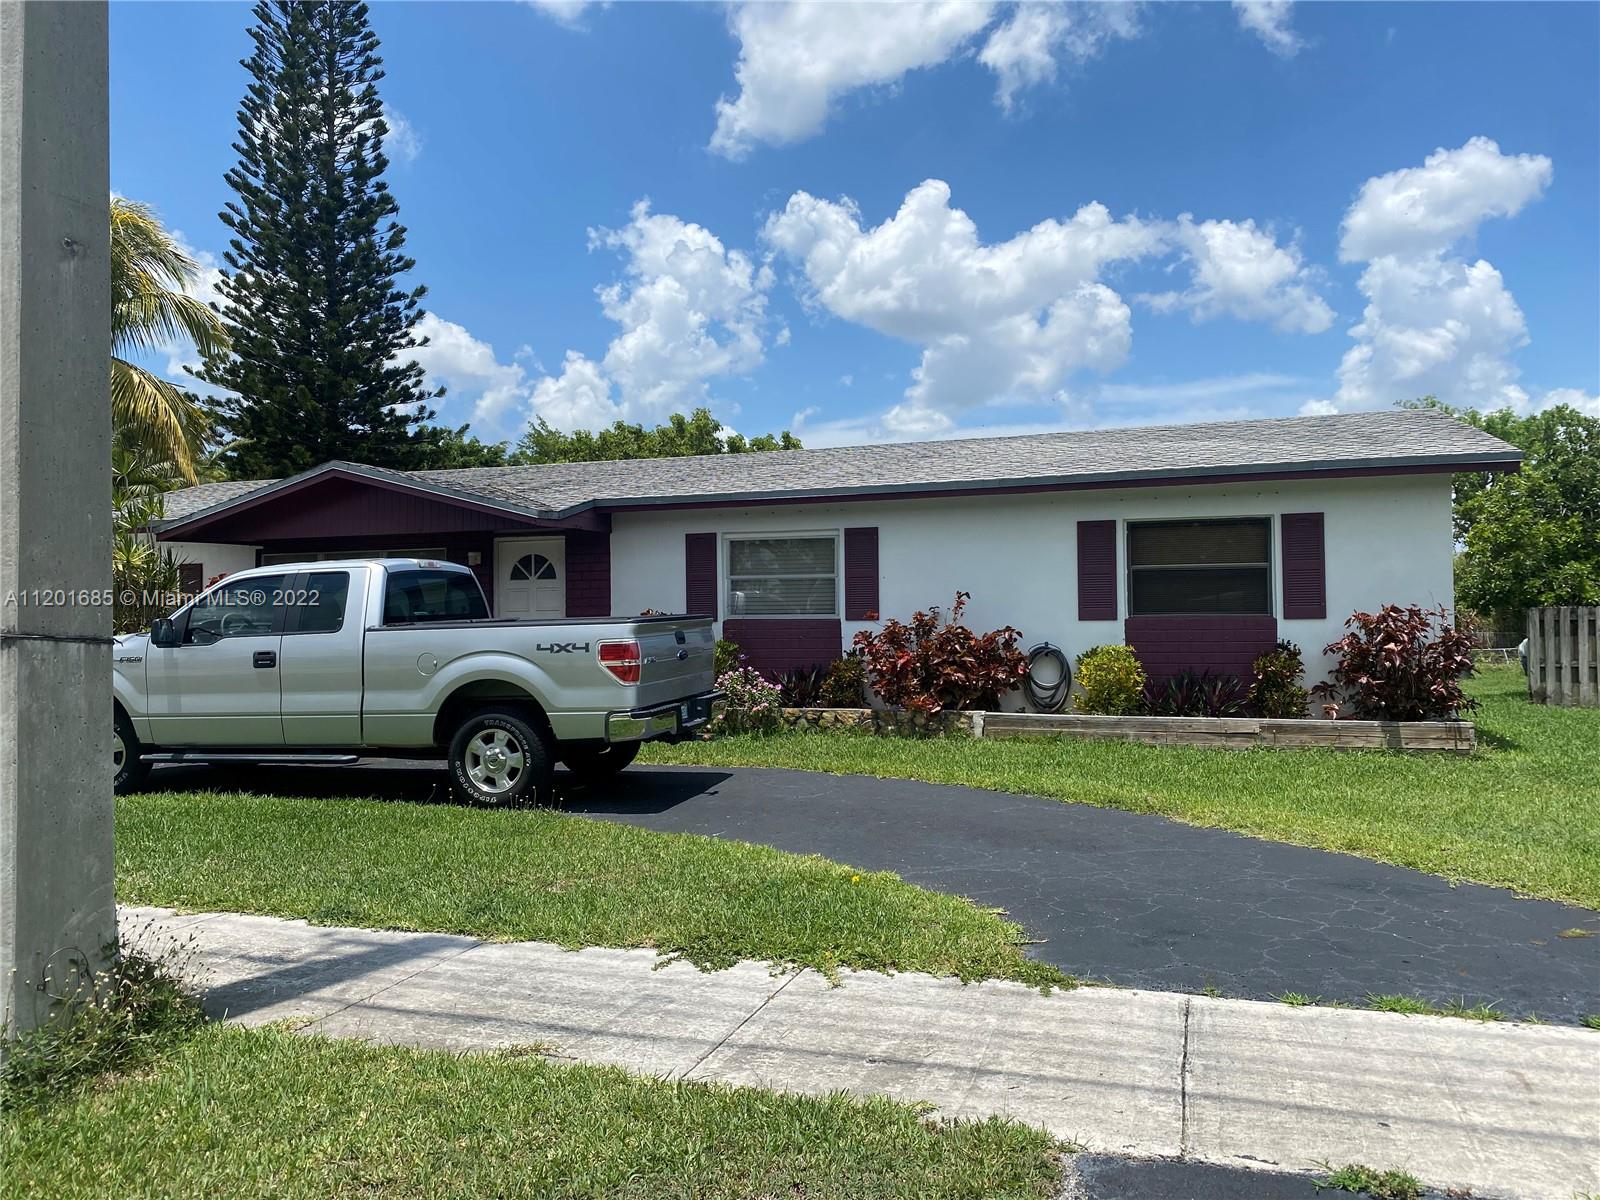 This is a 3/2 home sitting on a 1/3 of an acre. The property needs updating but has a lot of potential and a lot of land for possible addition to the current structure. Do not disturb owner.